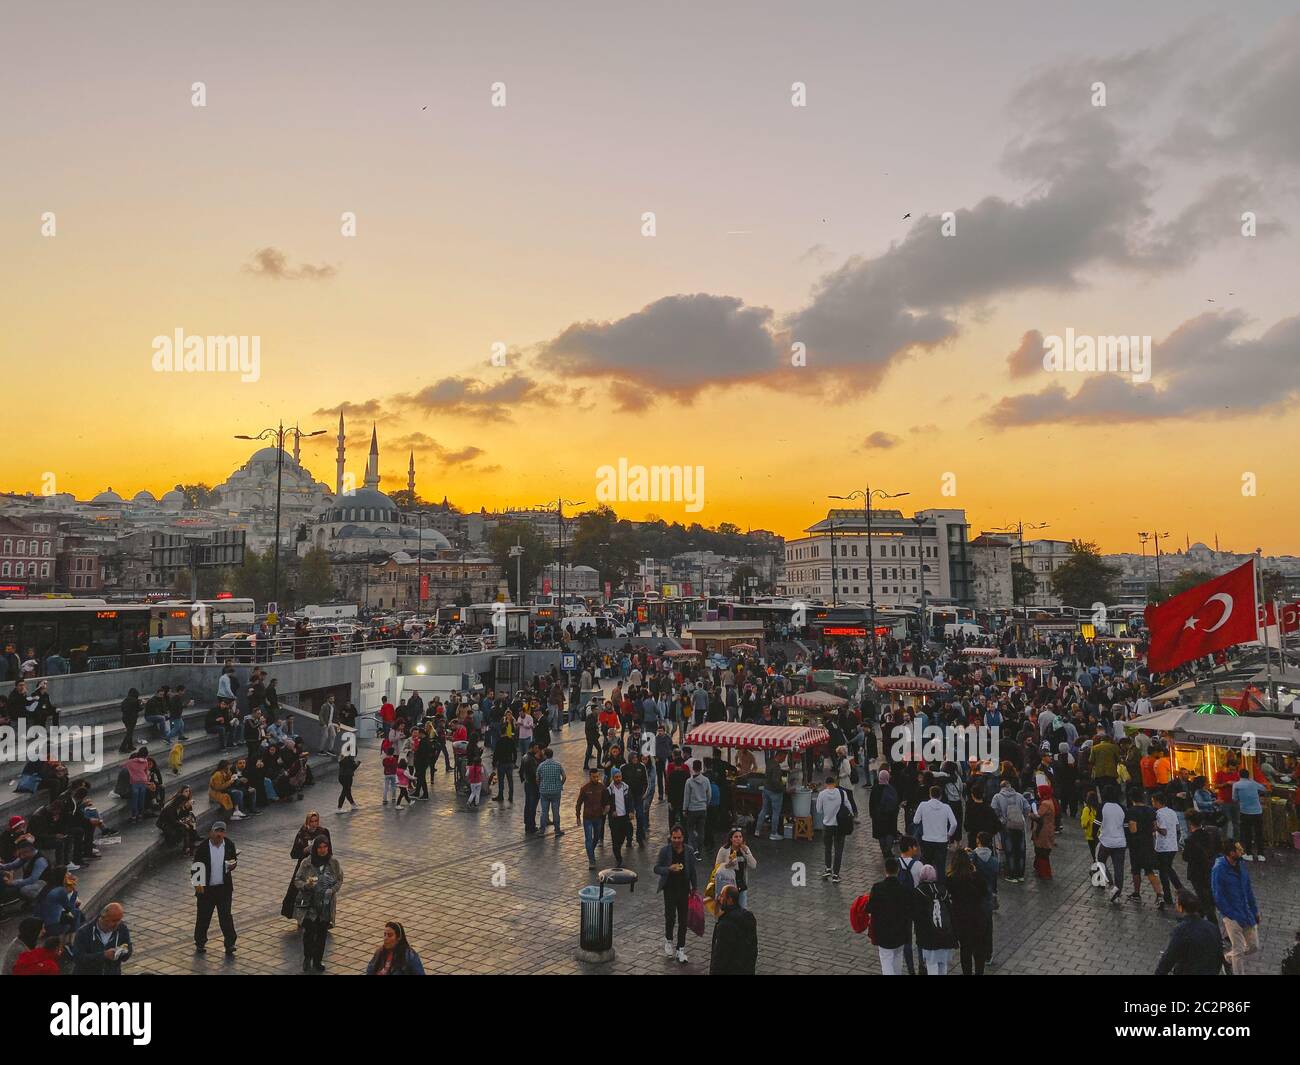 October 27, 2019. Eminonu square by sunset, Istanbul, in Turkey. People rest and socialize in a square near Galata Bridge, shopp Stock Photo